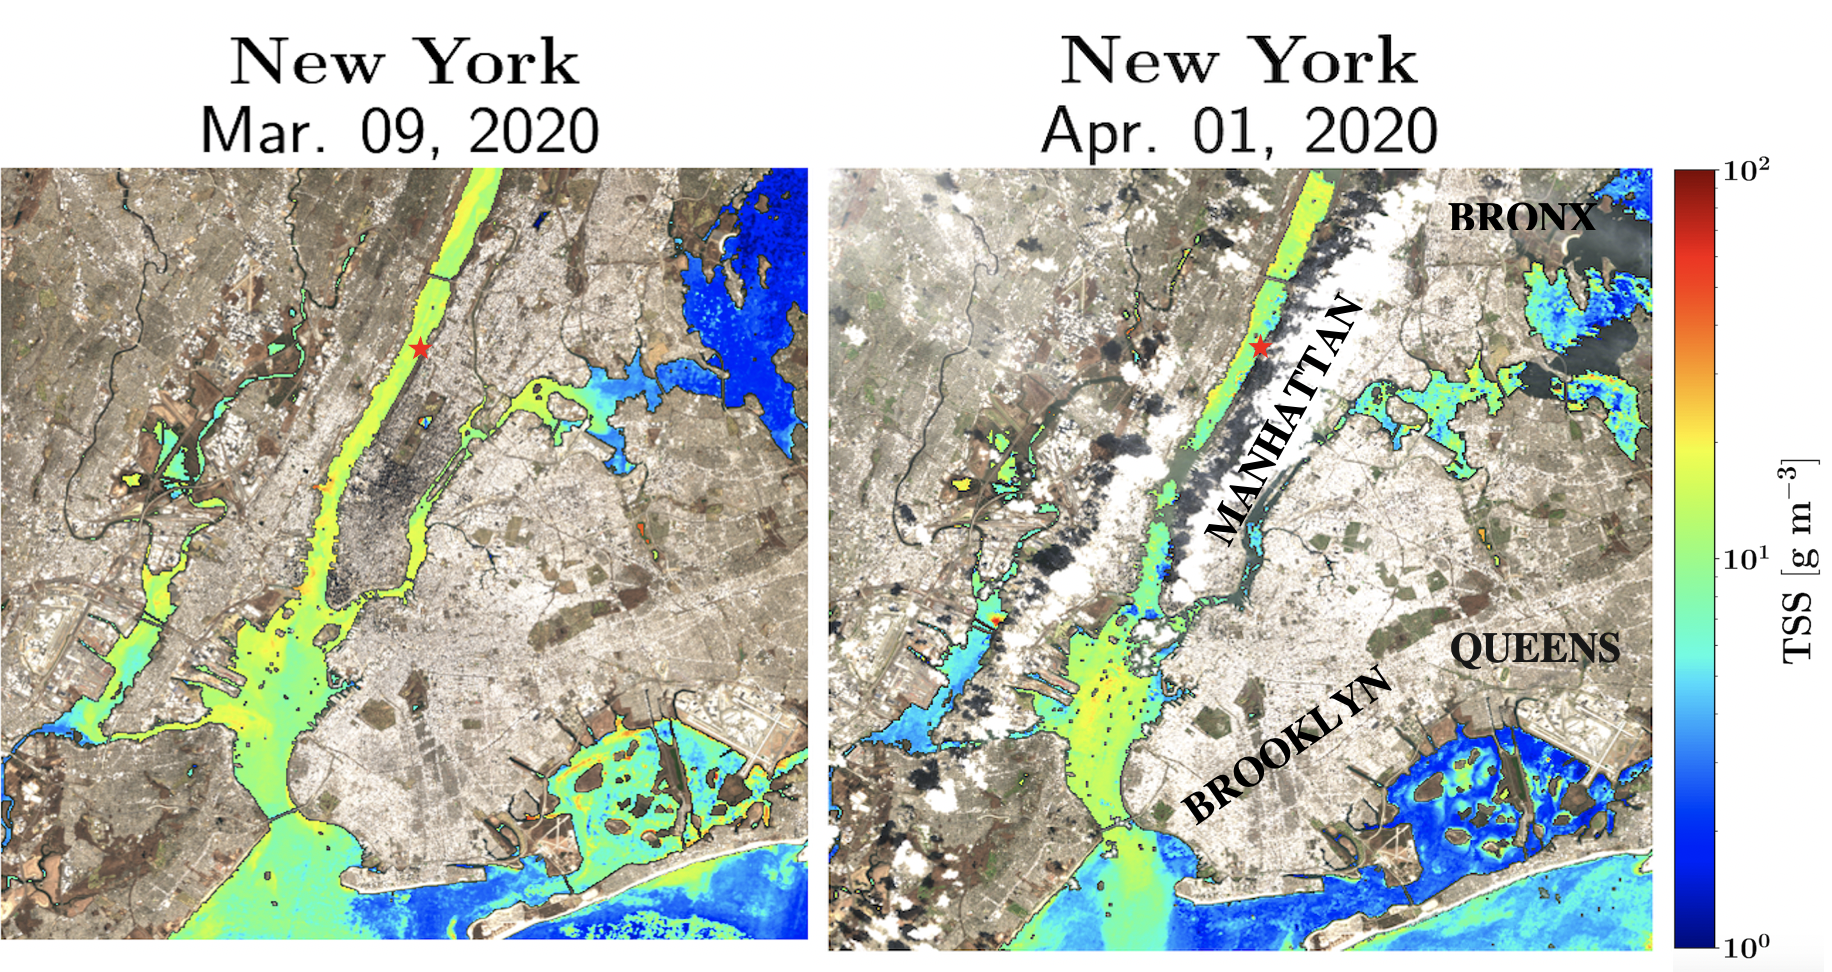 Maps of New York City showing turbidity before and during the pandemic.